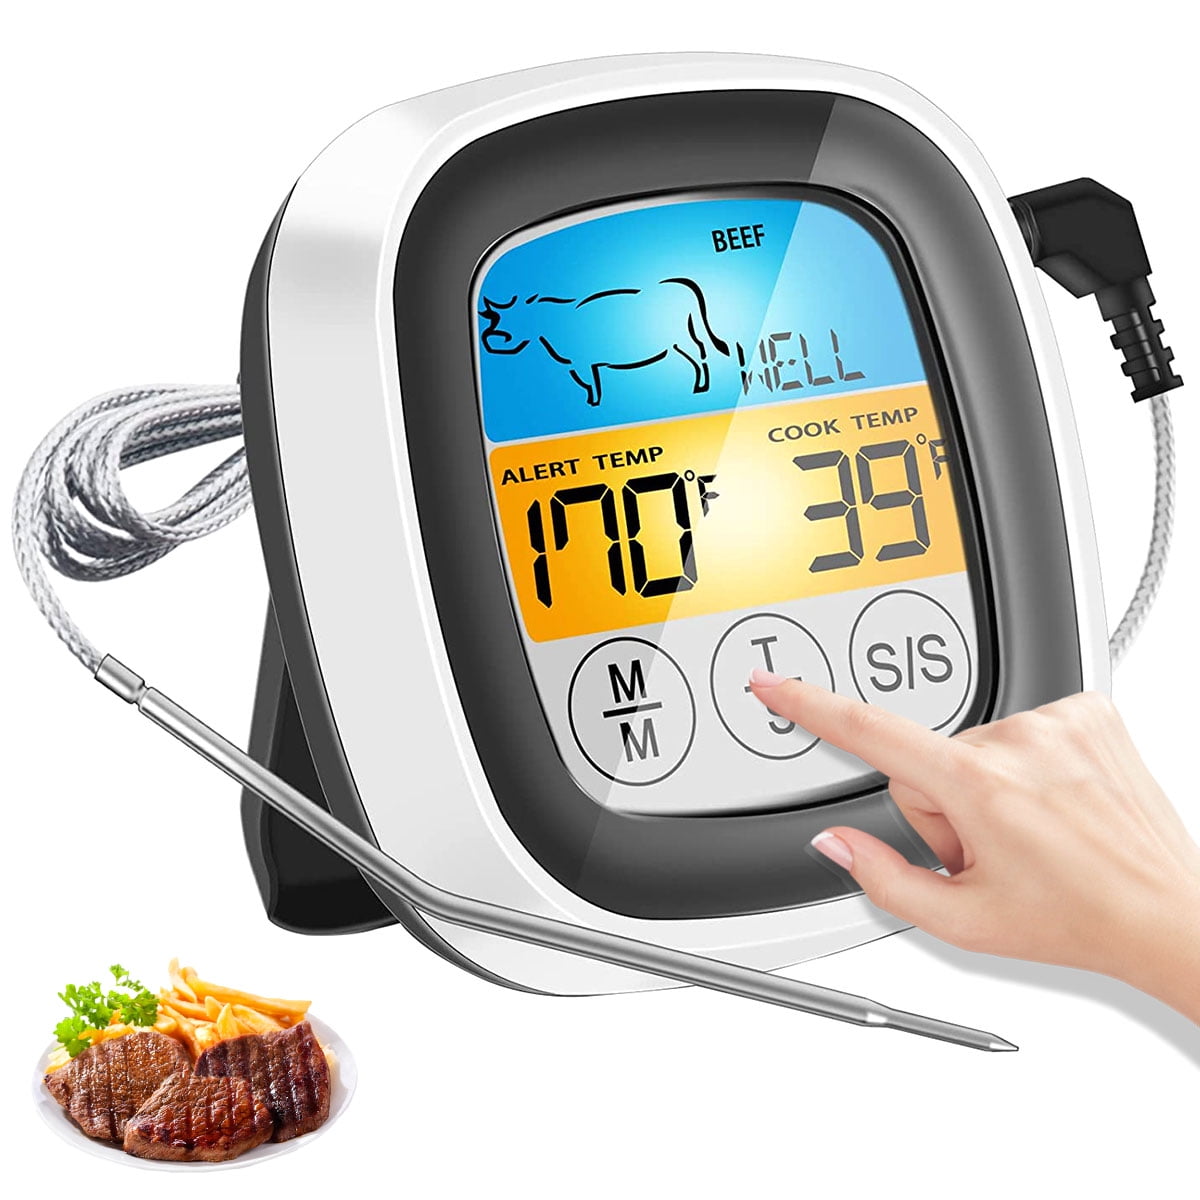 Engsav Digital Meat Thermometer Instant Read, Meat Thermometer for Kitchen, Cooking, Grilling, Turkey, Steak, Wireless Temperature Probe with